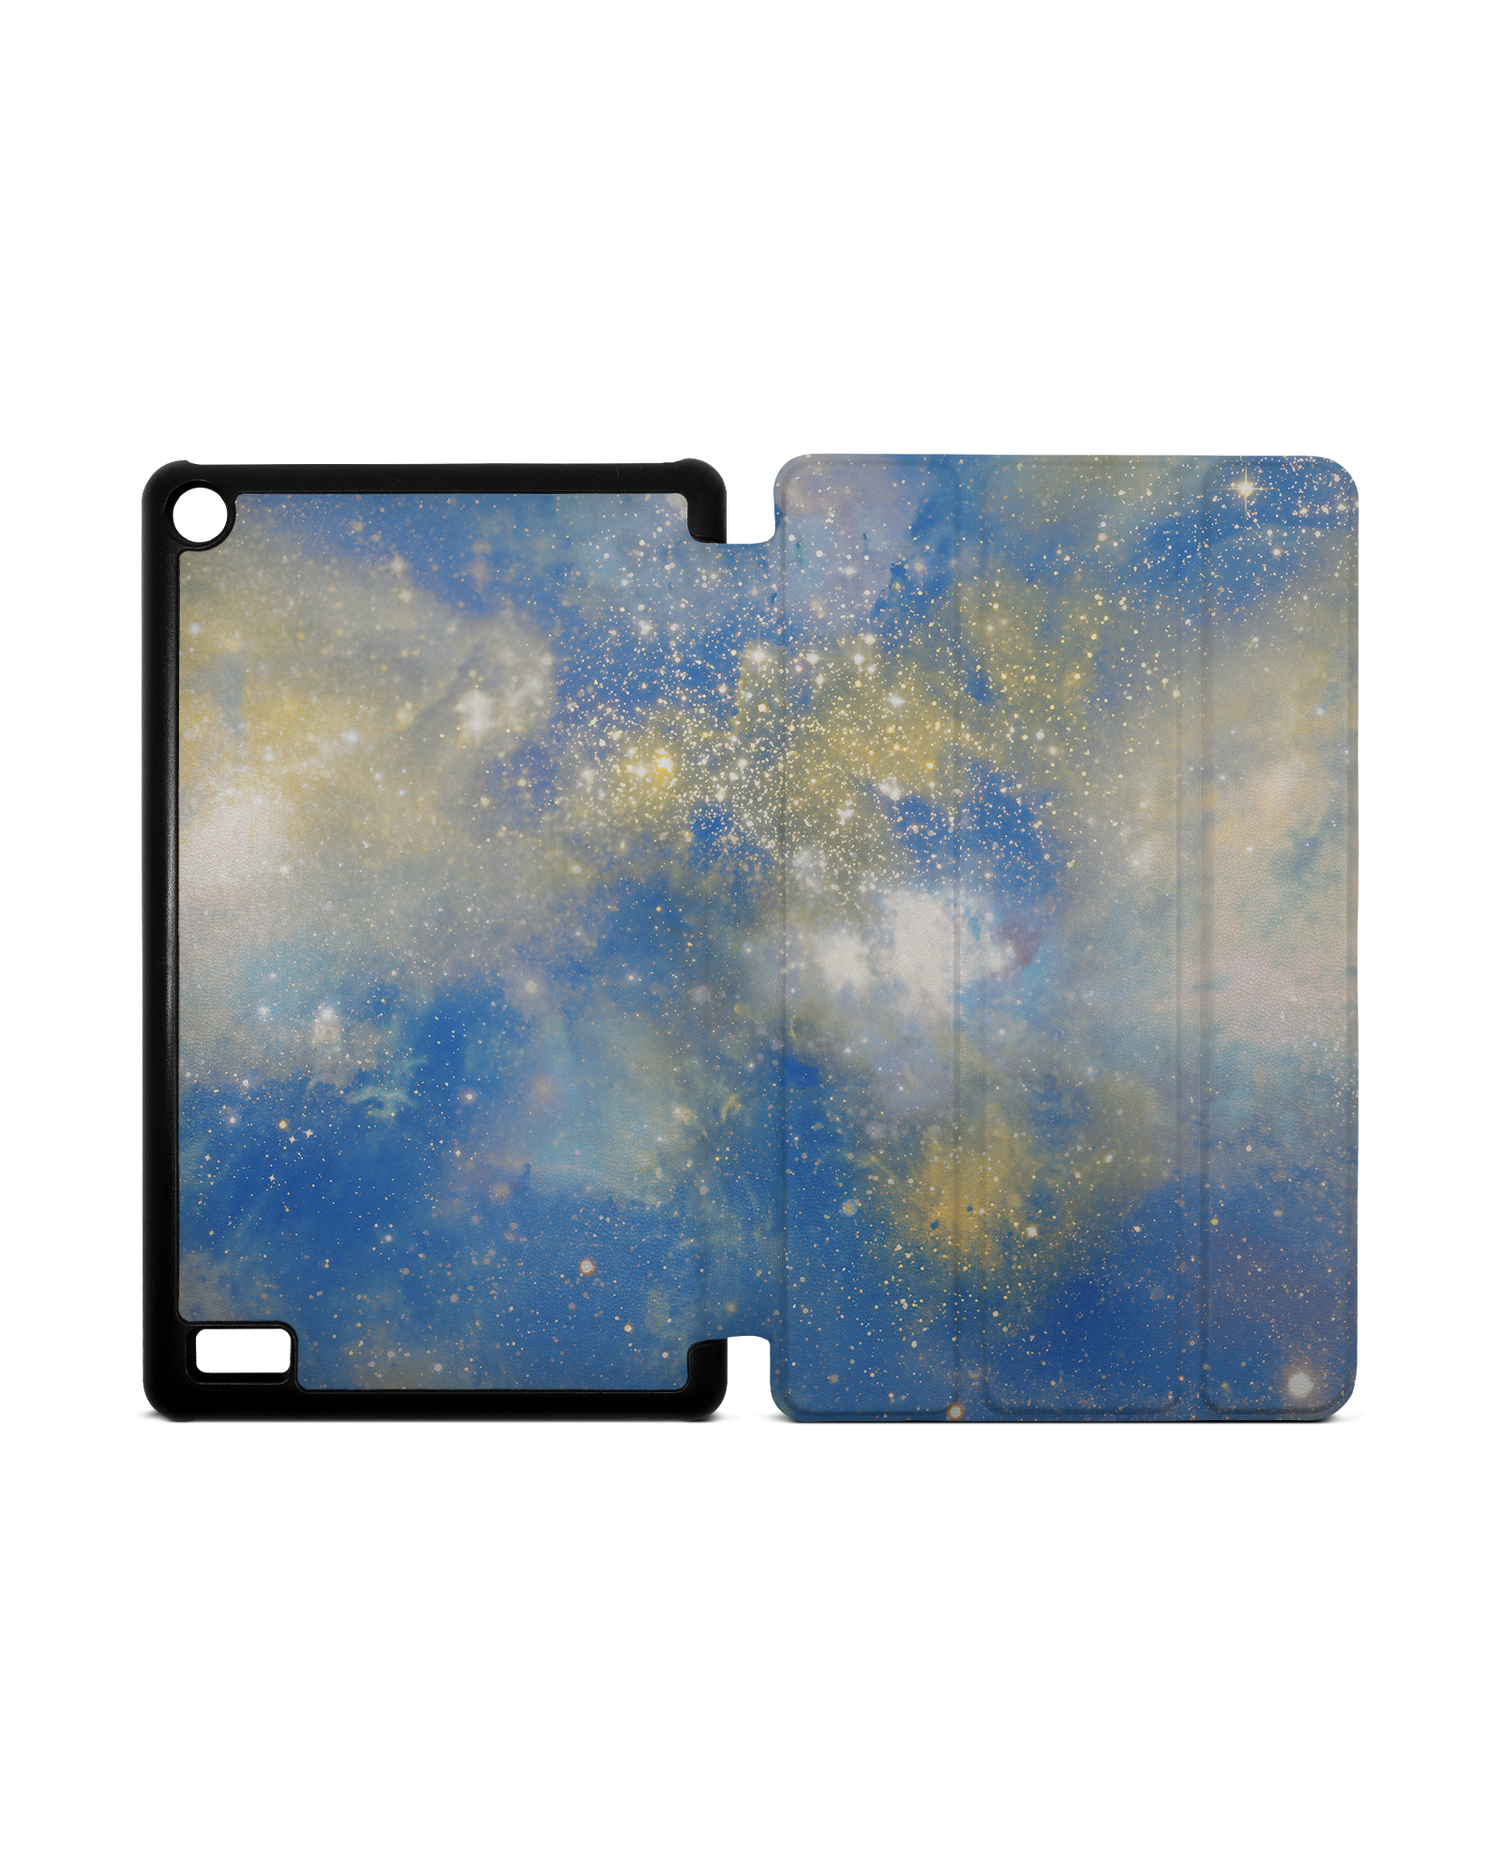 Spaced Out Tablet Smart Case for Amazon Fire 7: Opened